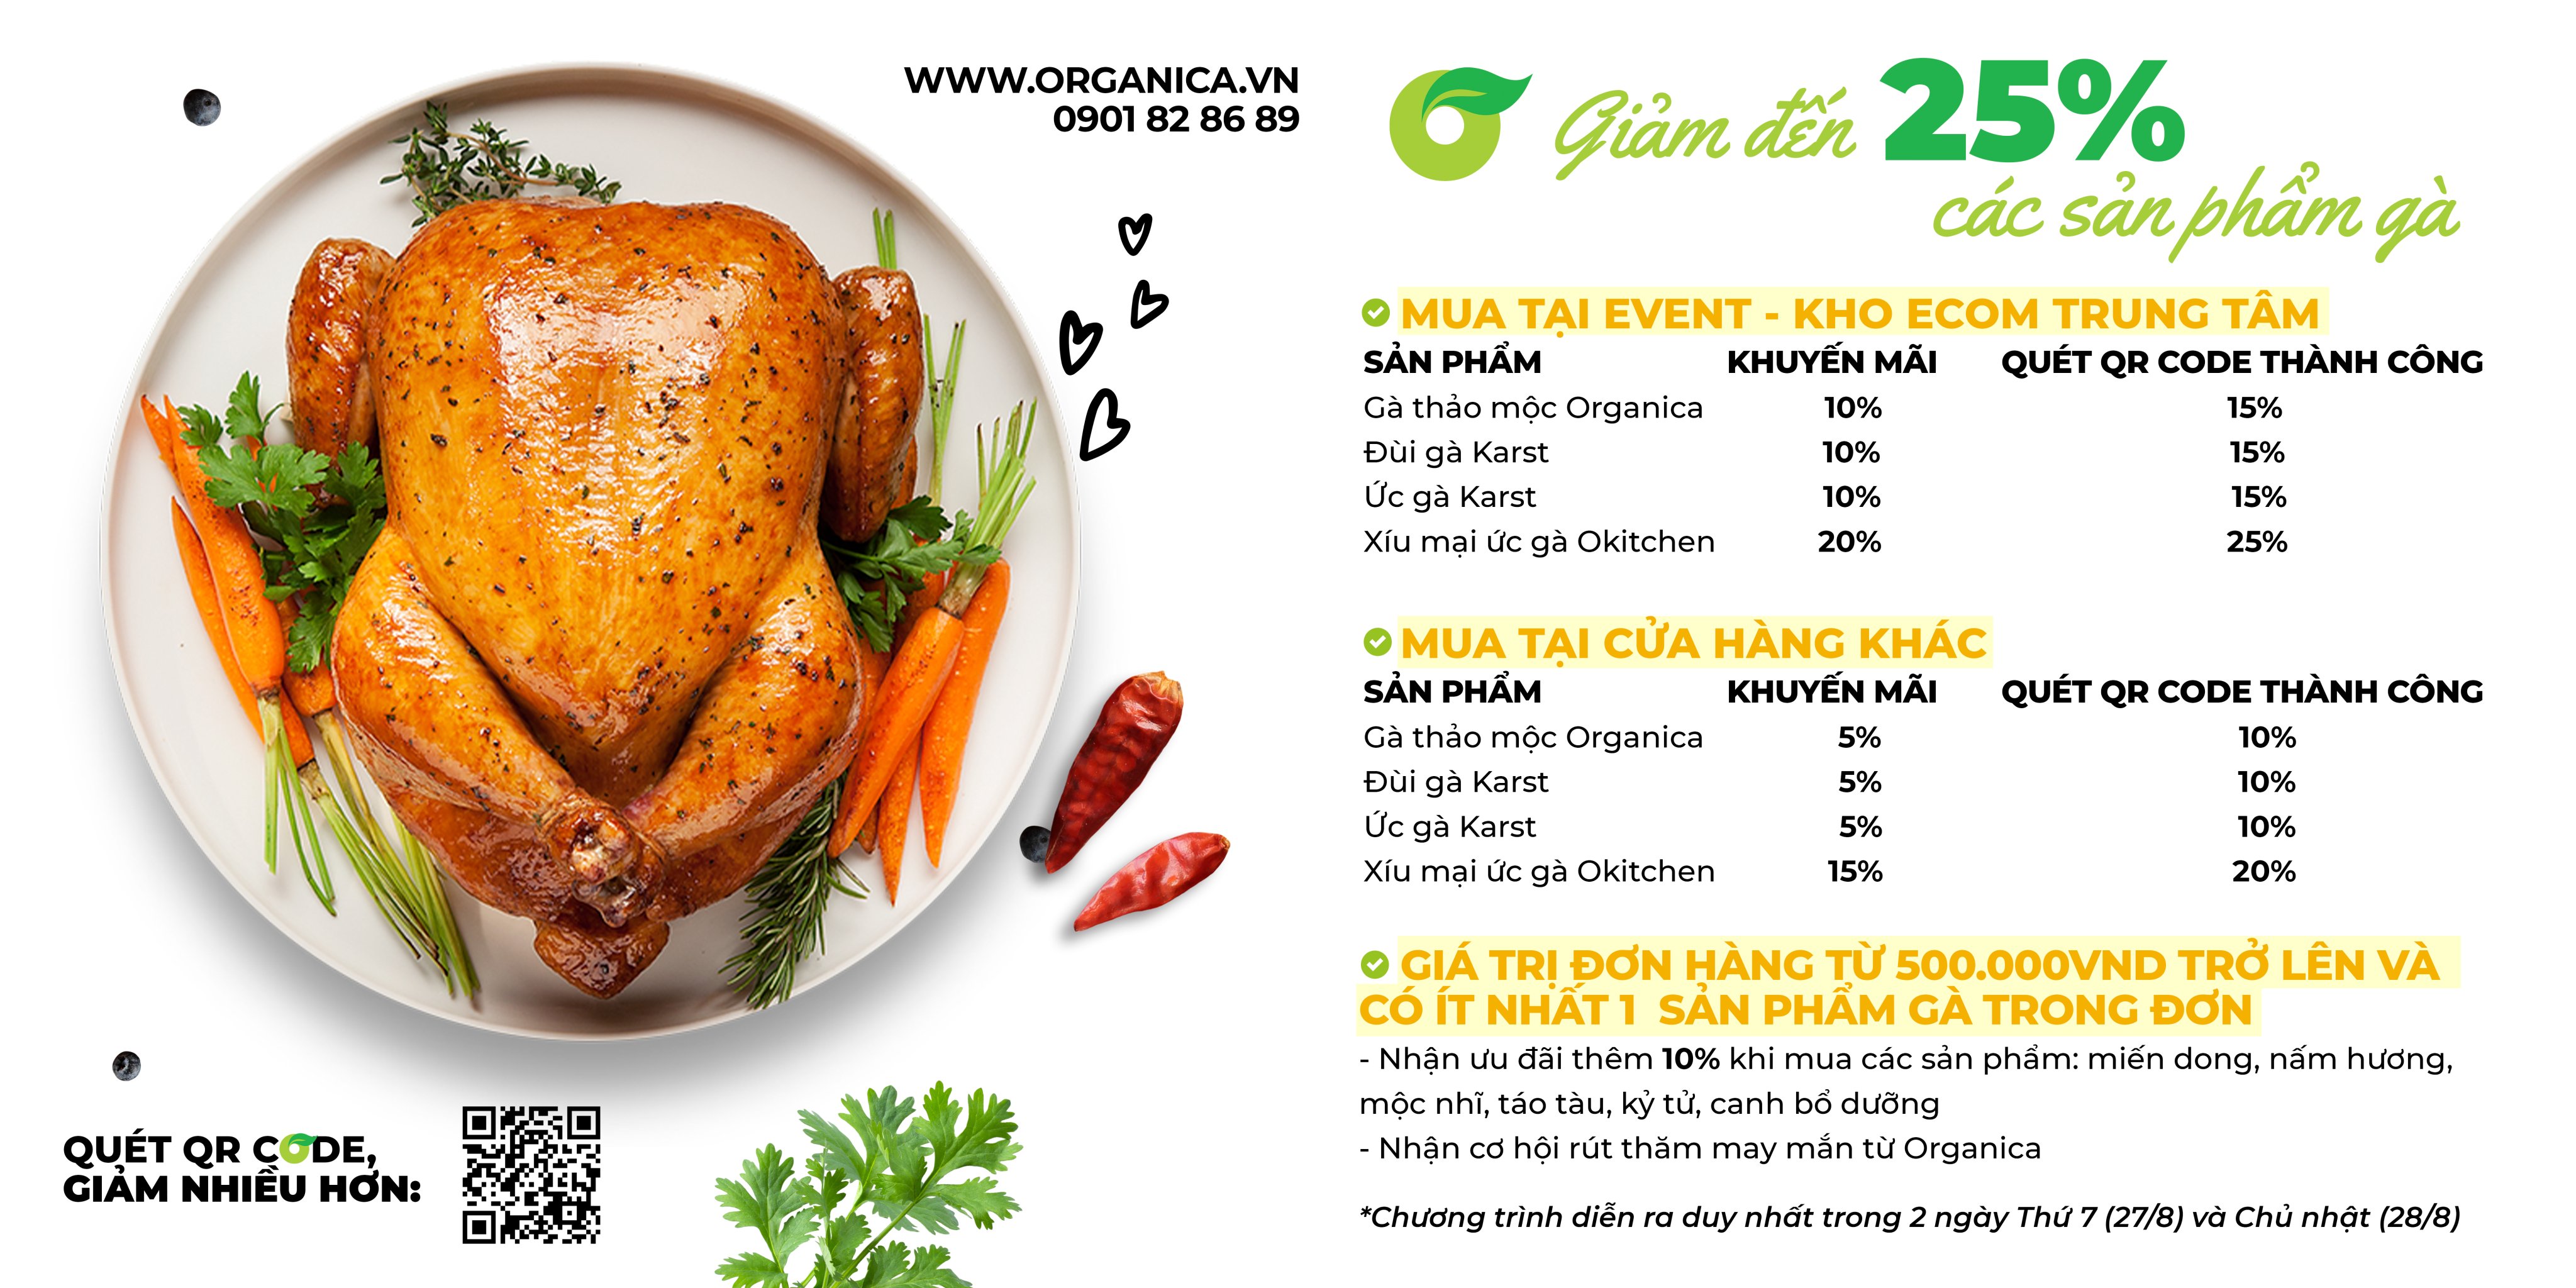 HOT SALE UP TO 25% FOR CHICKEN 27 & 28.08.2022